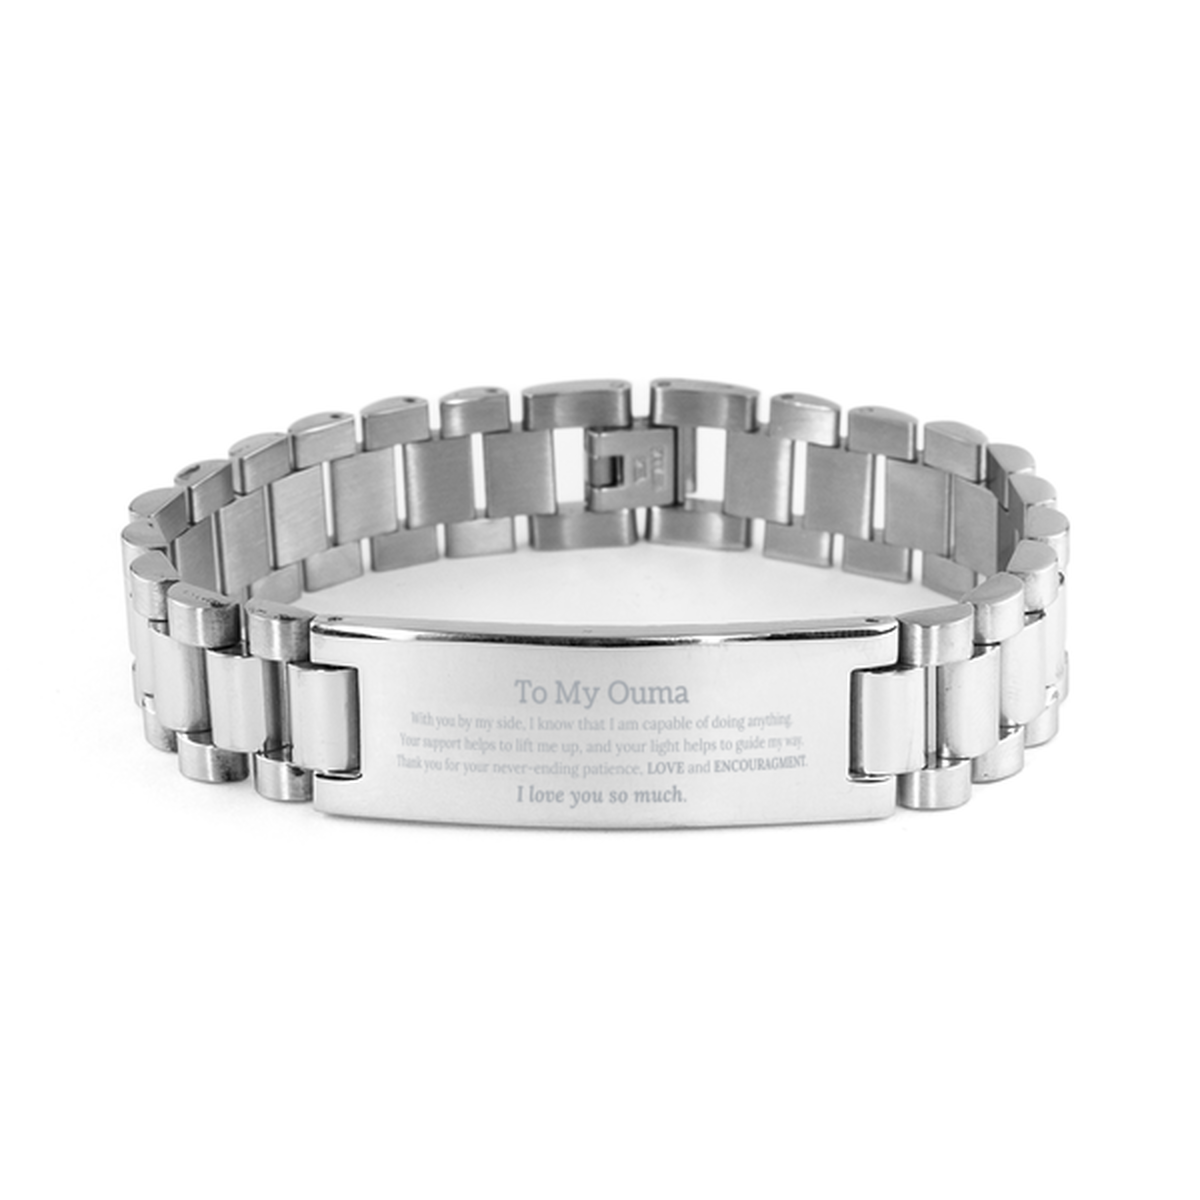 Appreciation Ouma Ladder Stainless Steel Bracelet Gifts, To My Ouma Birthday Christmas Wedding Keepsake Gifts for Ouma With you by my side, I know that I am capable of doing anything. I love you so much